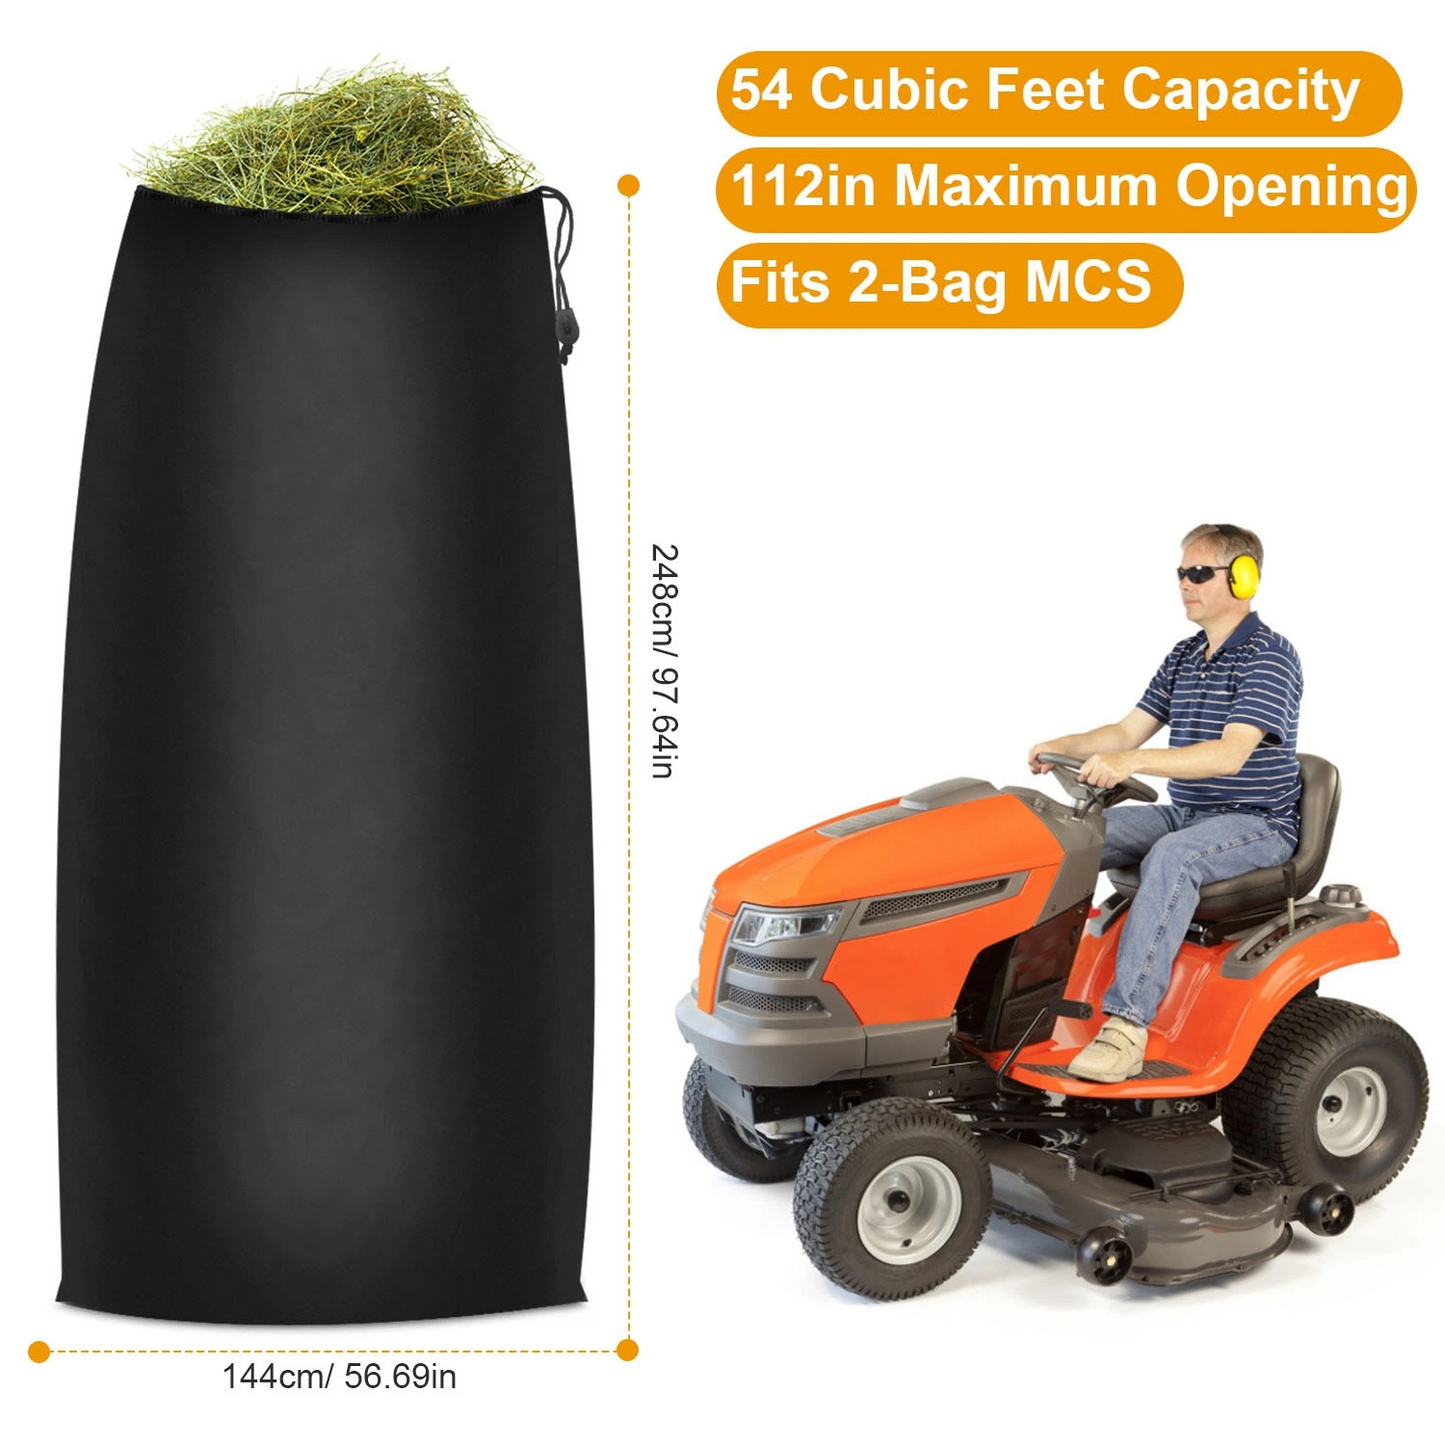 54 Cubic Feet Lawn Tractor Leaf Bag: Standard Garden Waste Collection System with 112-Inch Opening